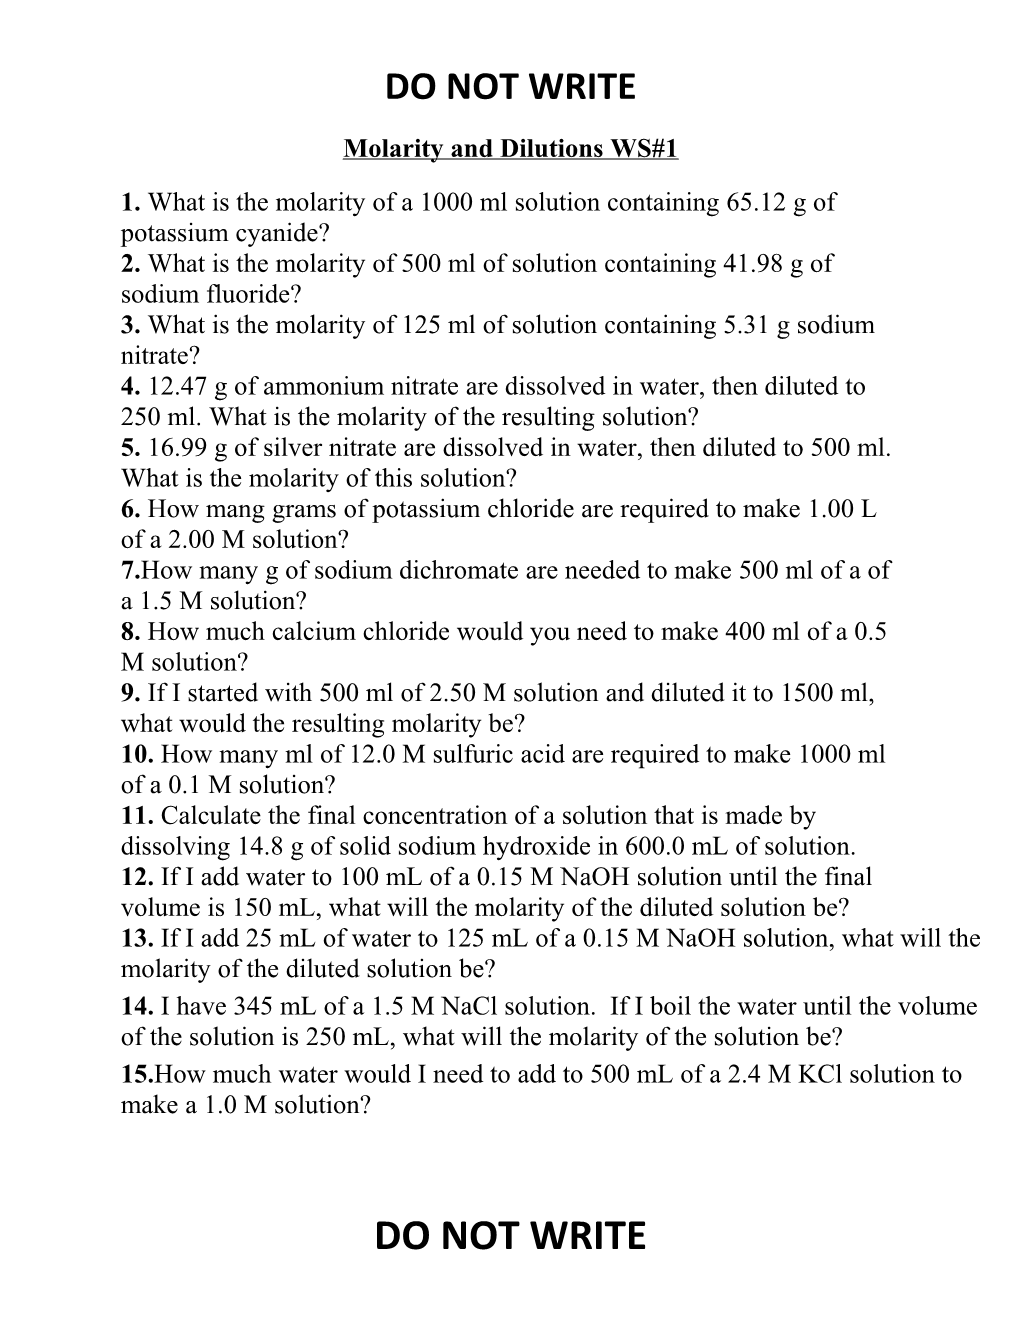 Molarity and Dilutions WS#1